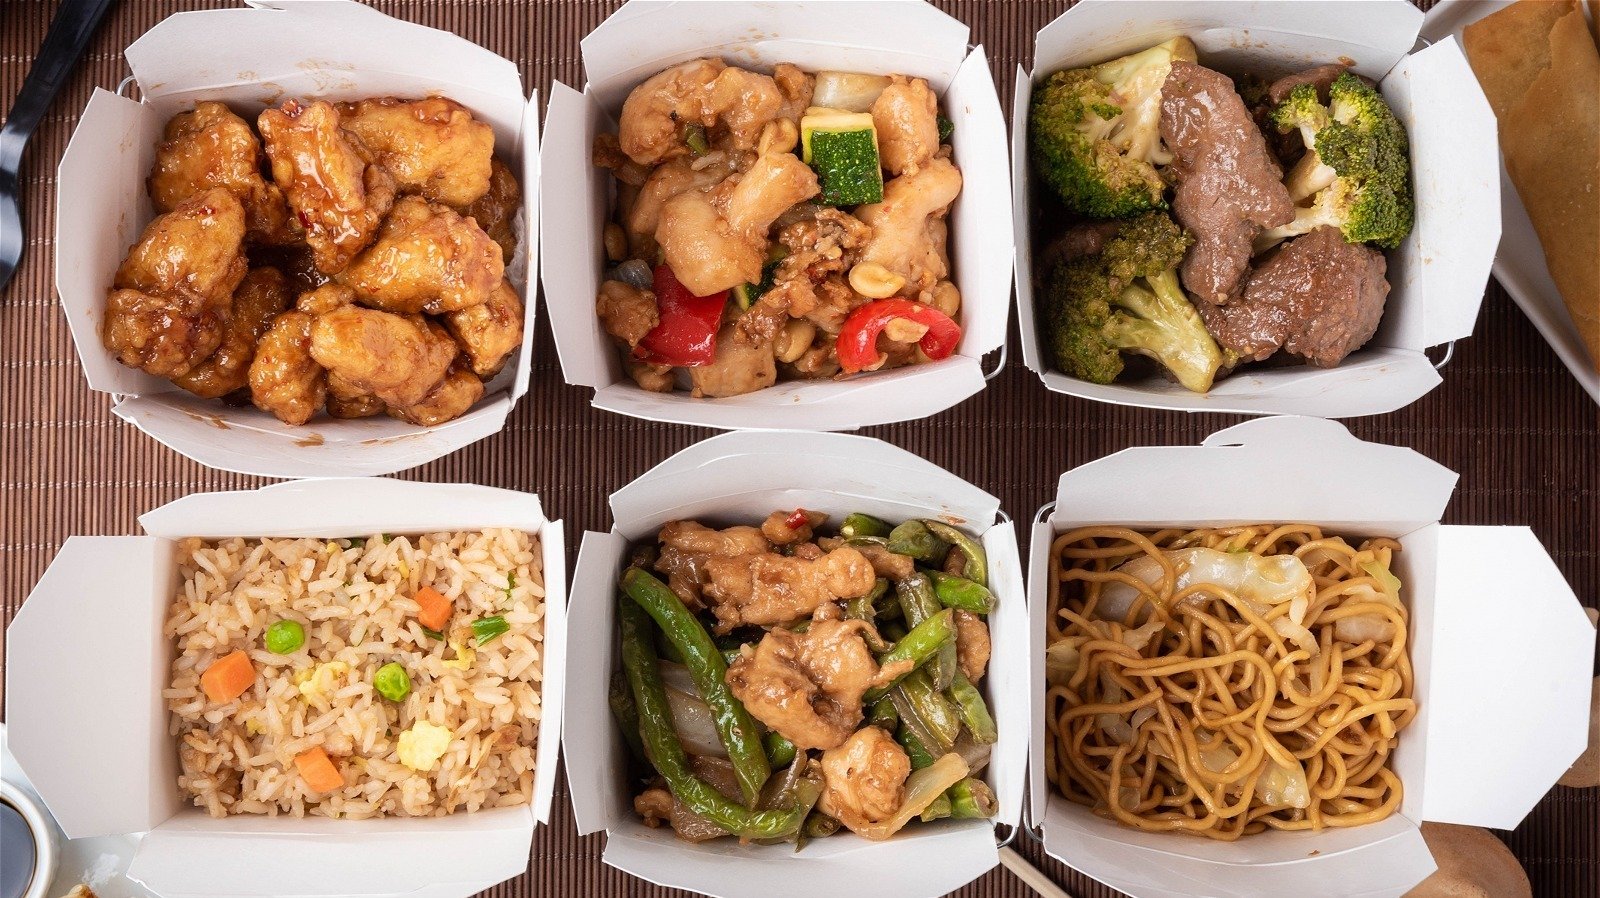 Make Chinese Takeout Last Longer With Cheap Frozen Veggies